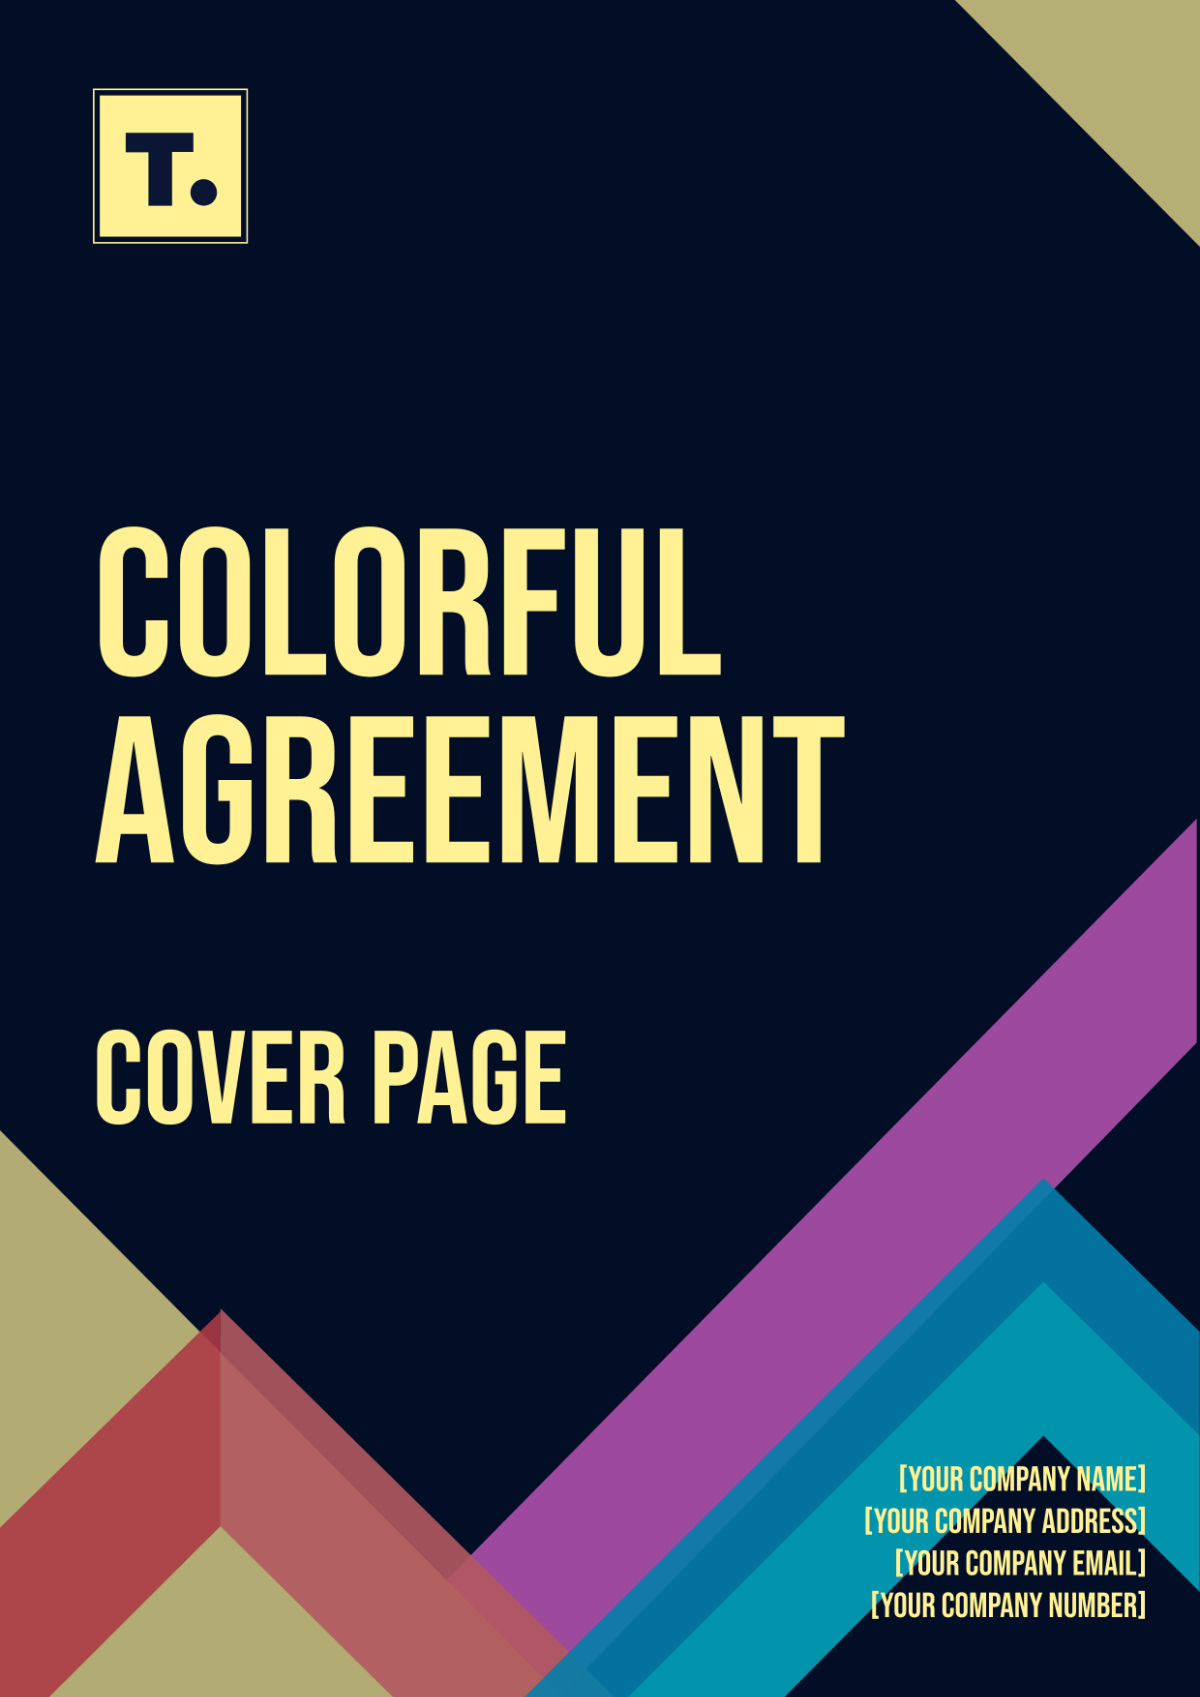 Colorful Agreement Cover Page